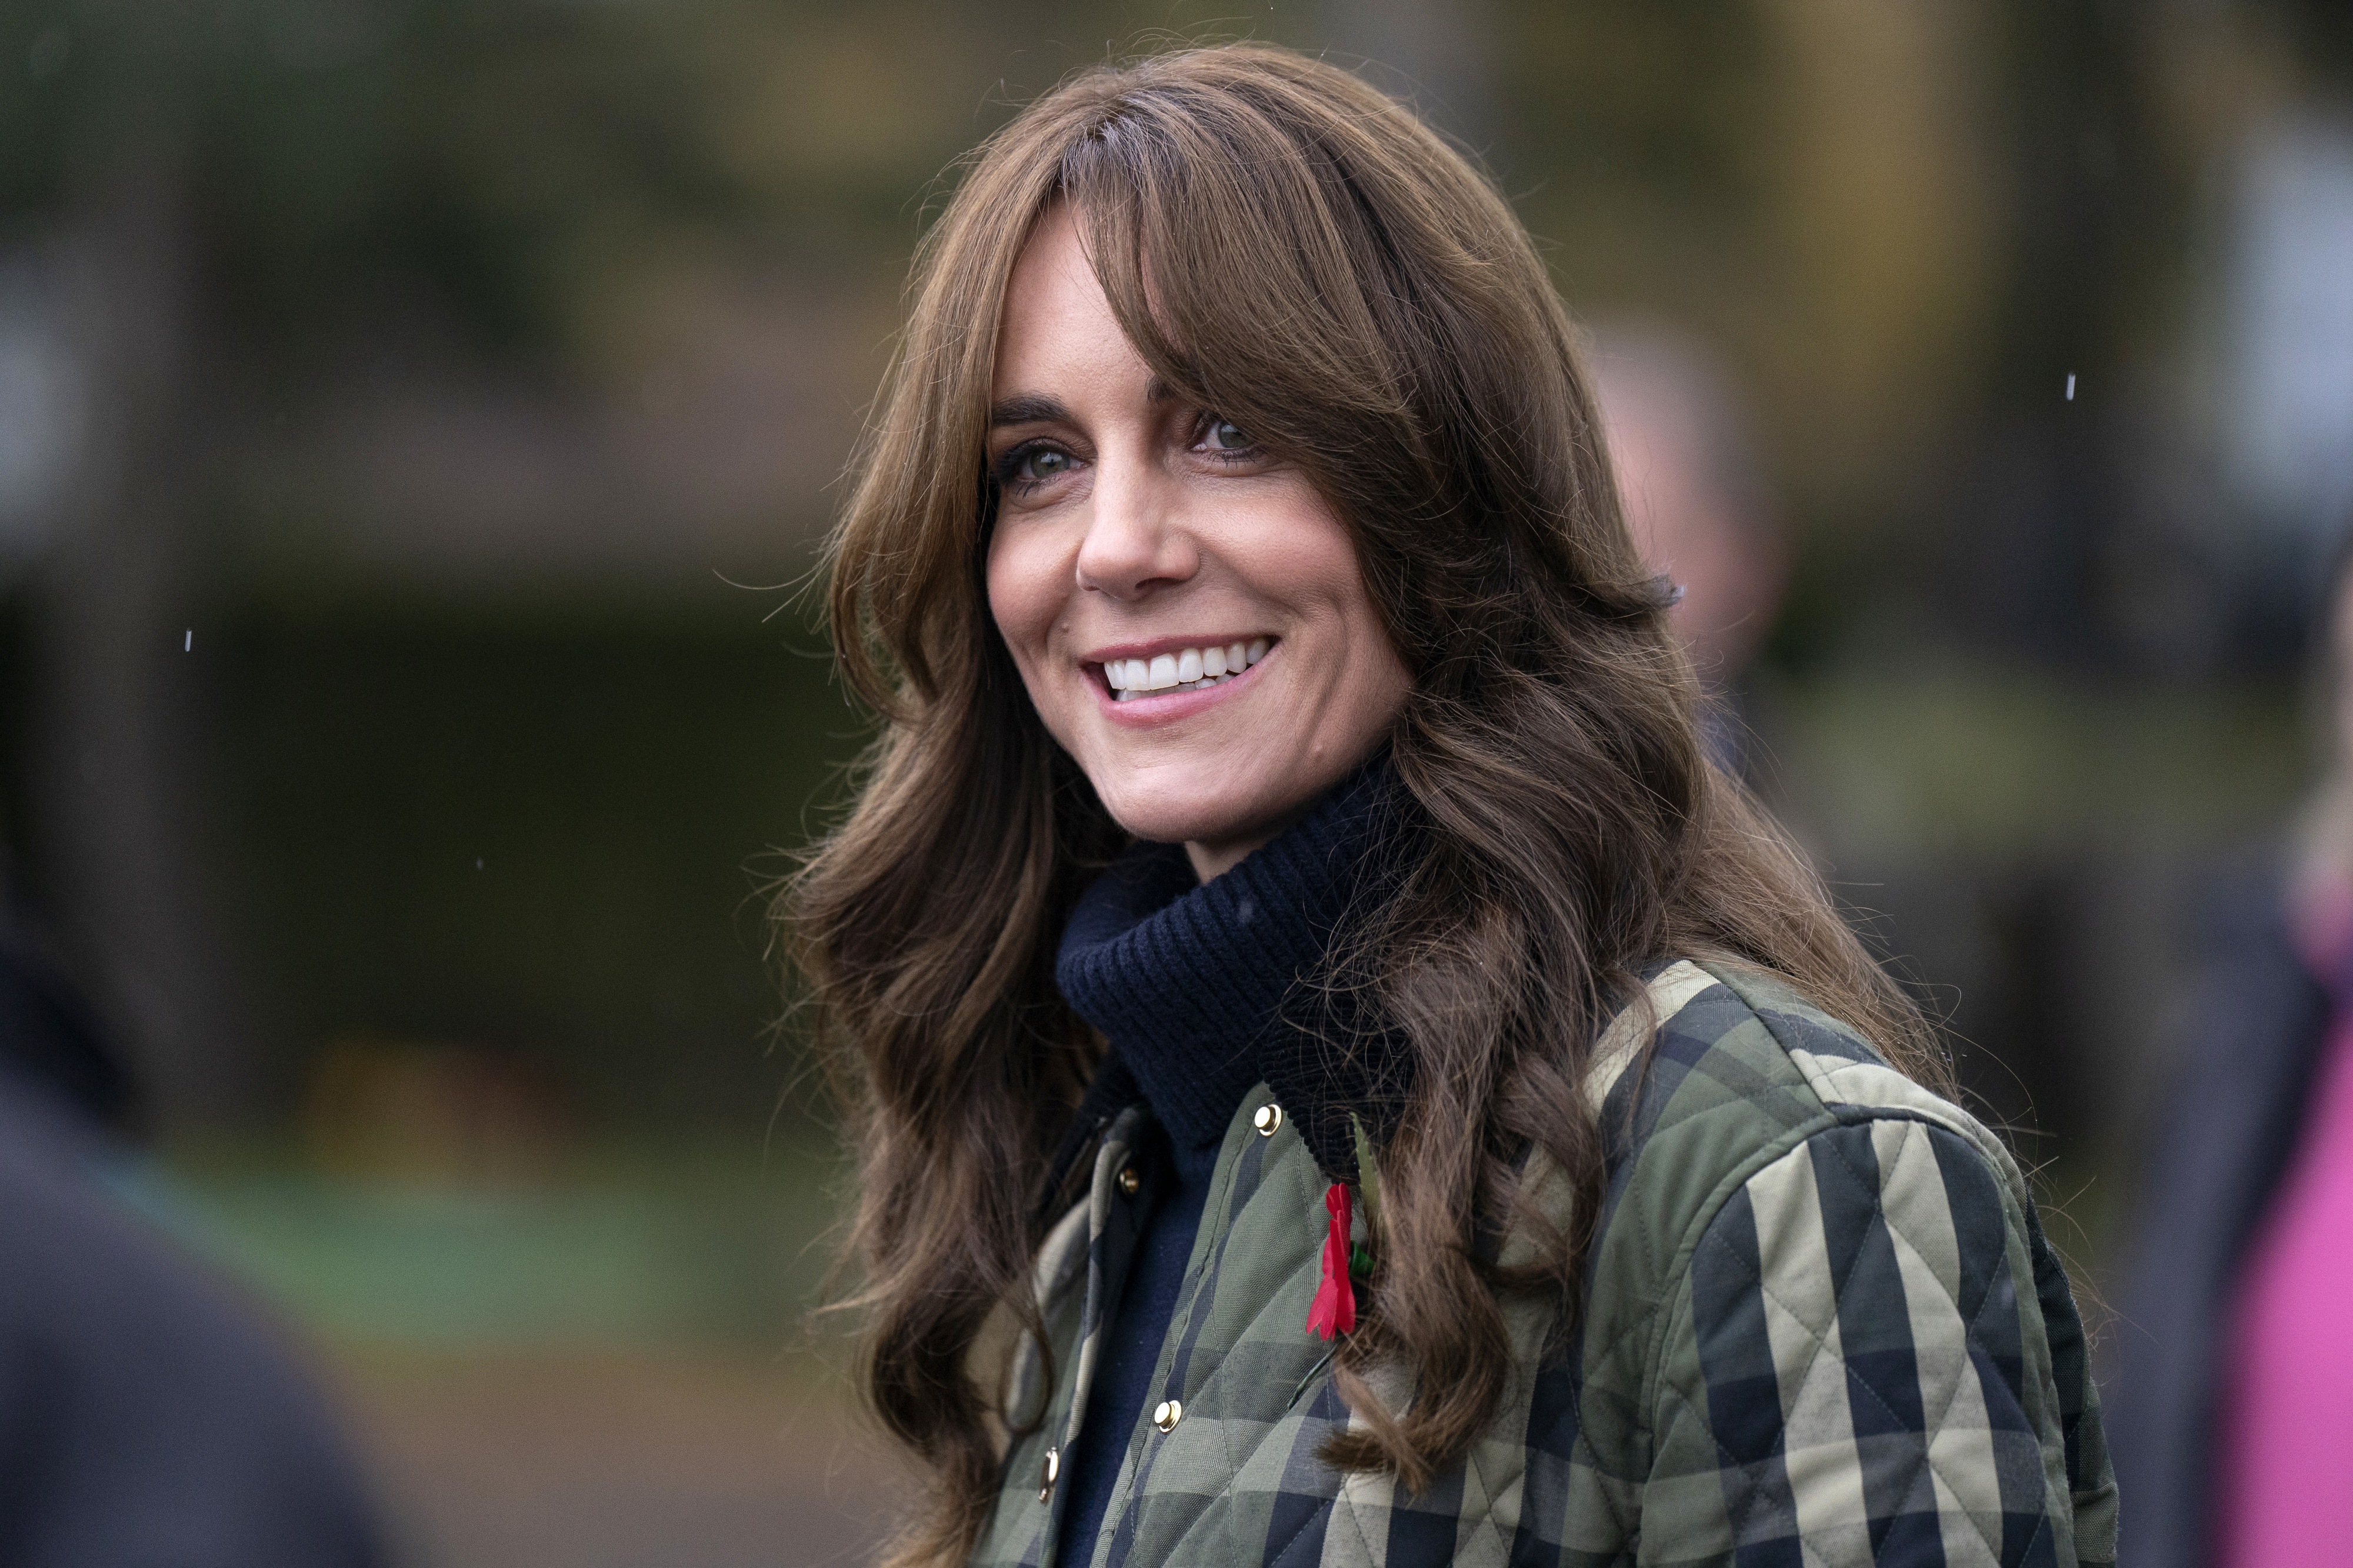 Kate Middleton wearing a quilted jacket, smiles during an outdoor event